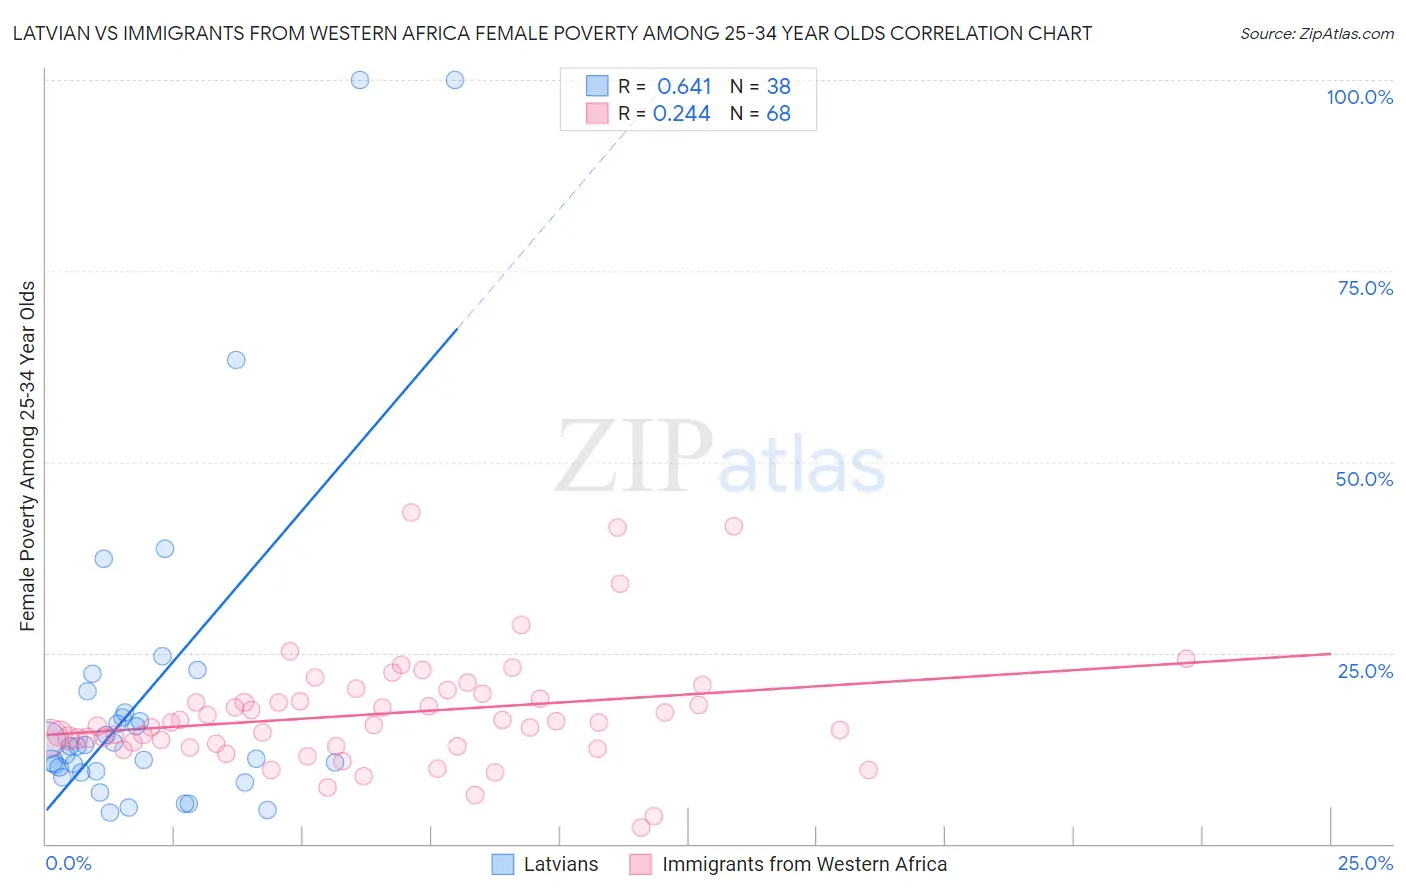 Latvian vs Immigrants from Western Africa Female Poverty Among 25-34 Year Olds